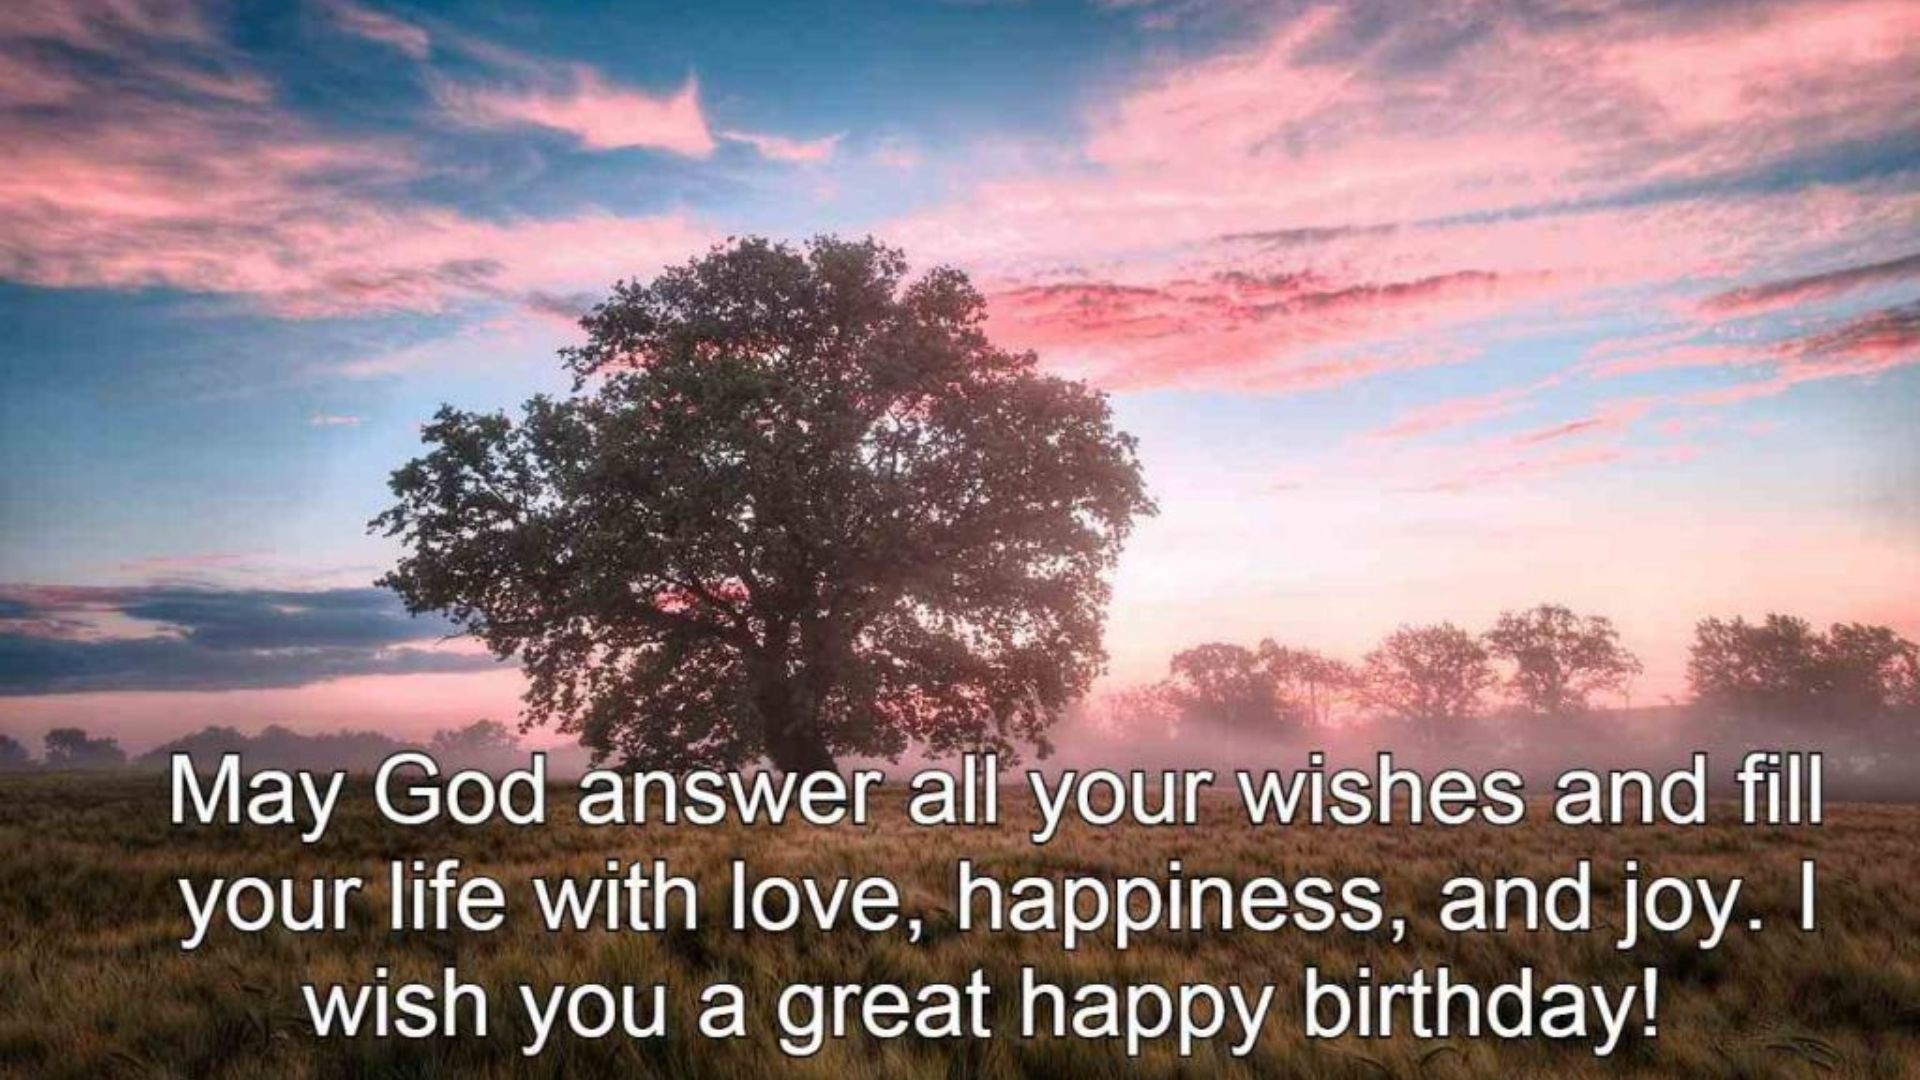 Christian Birthday Wishes For A Friend